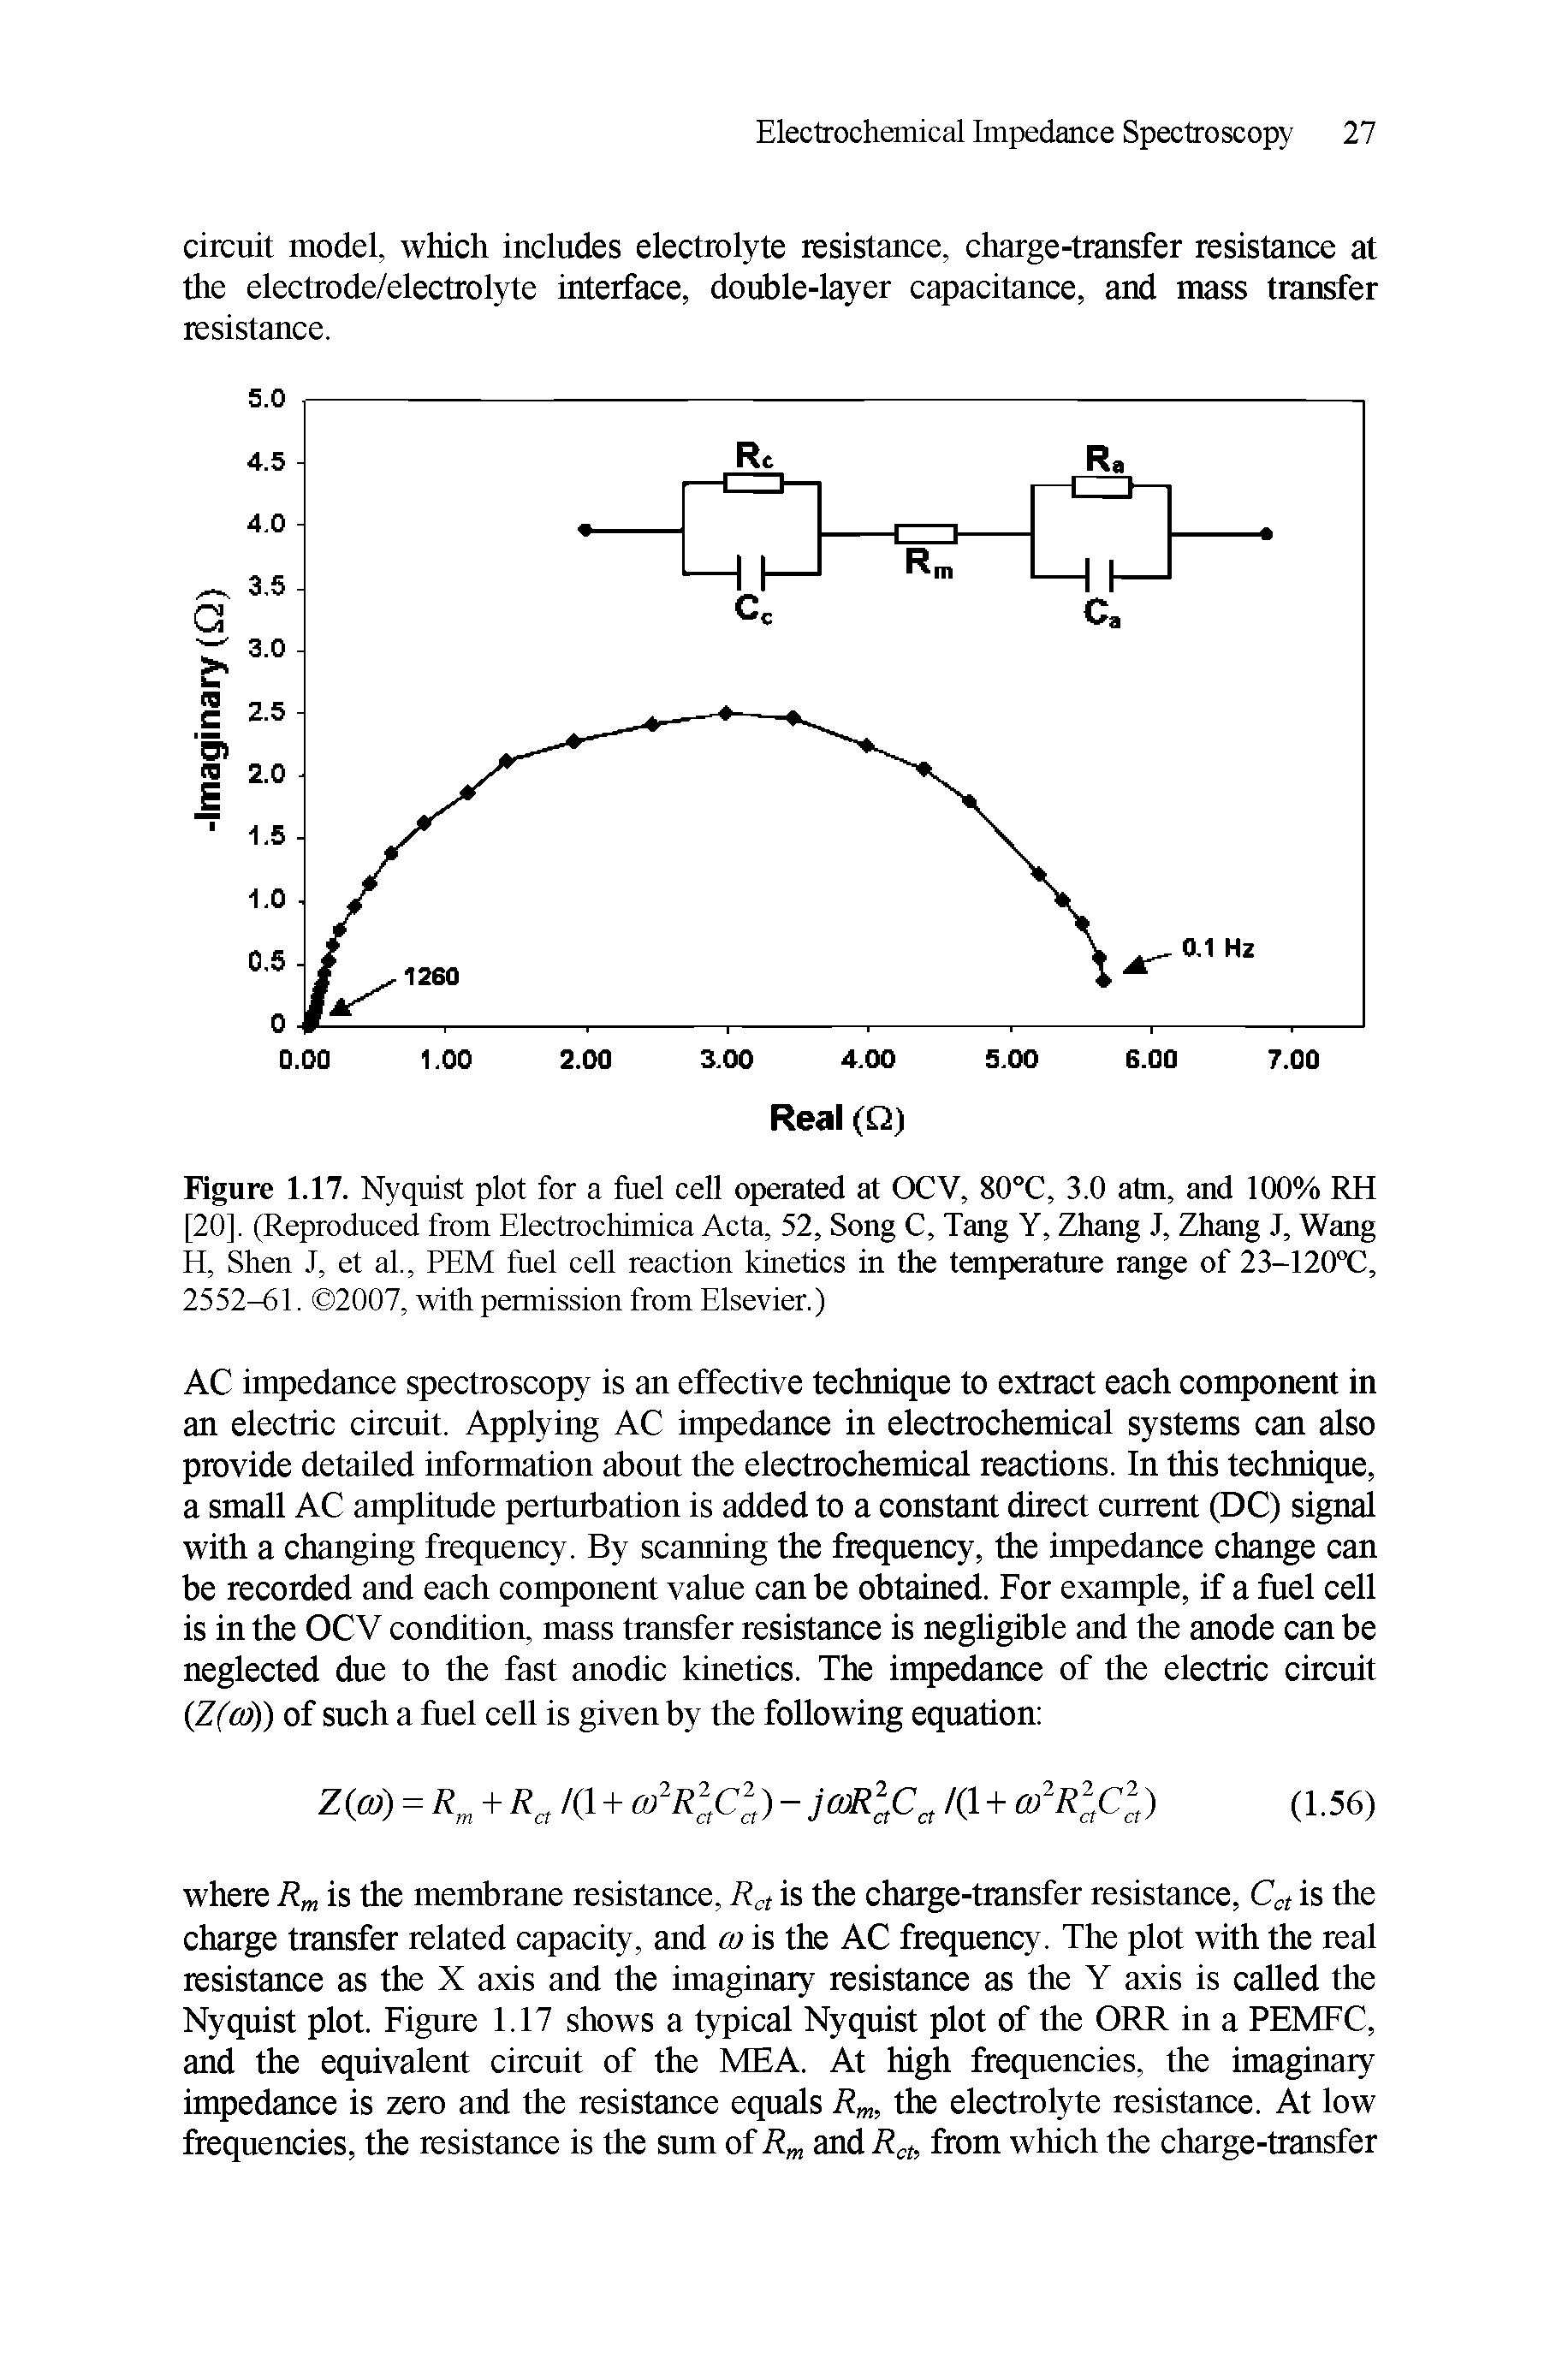 Figure 1.17. Nyquist plot for a fuel cell operated at OCV, 80°C, 3.0 atm, and 100% RH [20], (Reproduced from Electrochimica Acta, 52, Song C, Tang Y, Zhang J, Zhang J, Wang H, Shen J, et al., PEM fuel cell reaction kinetics in the temperature range of 23-120°C, 2552-61. 2007, with permission from Elsevier.)...